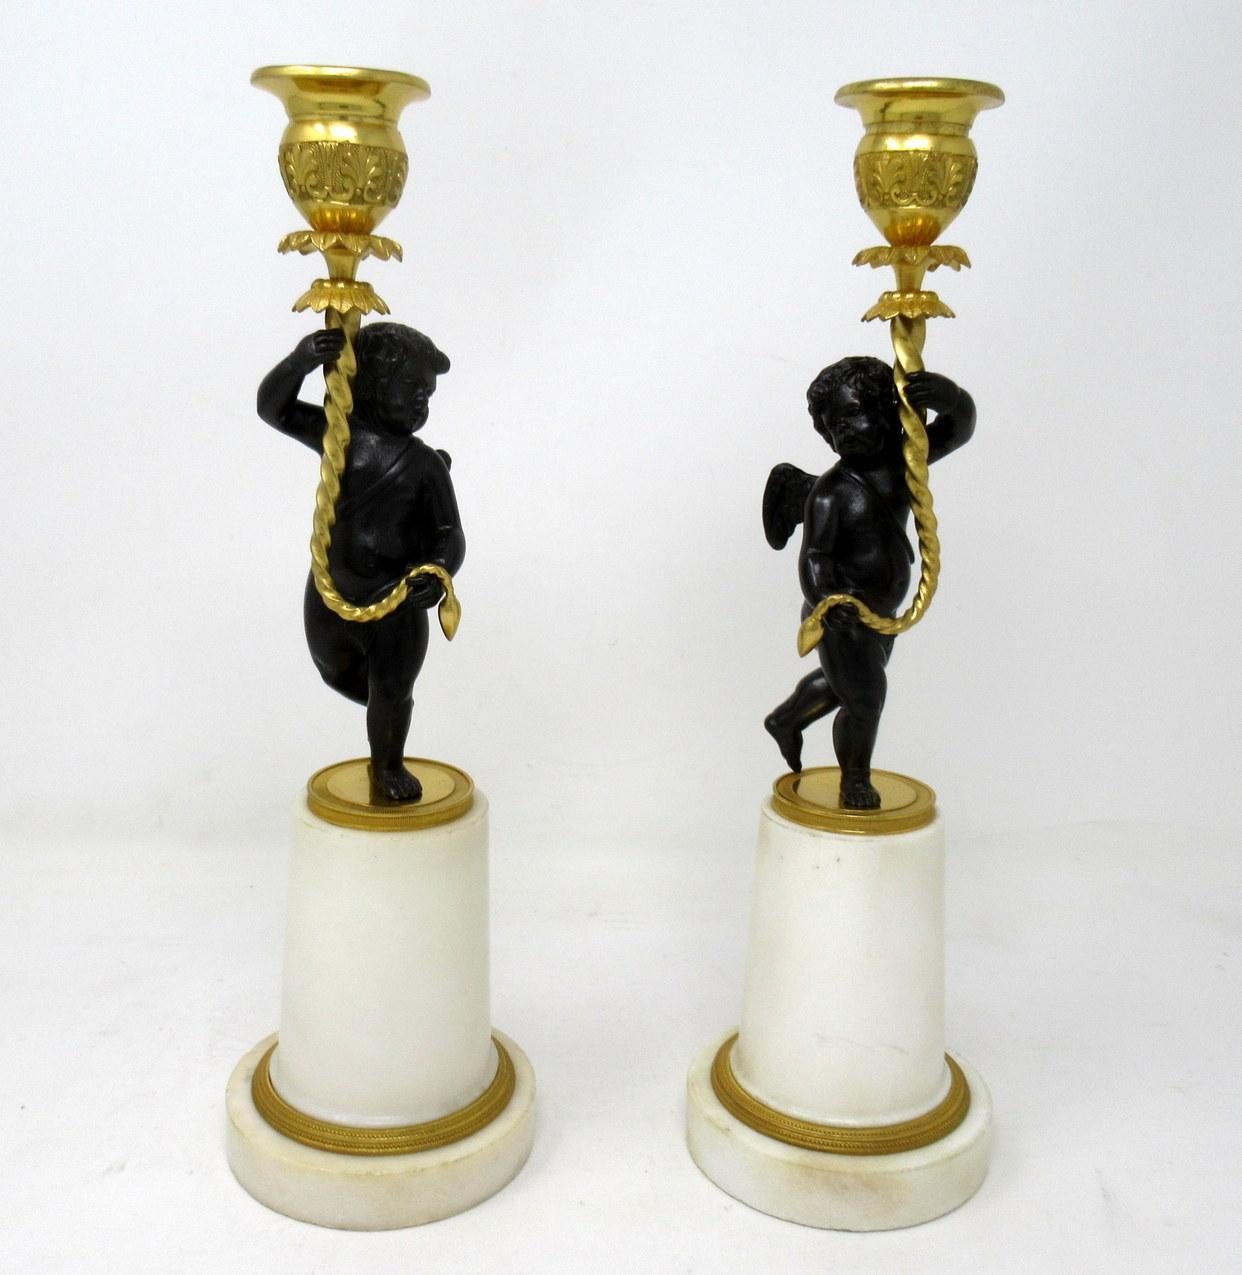 An exceptional pair of French single light creamy off-white statutory marble and bronze mantle candlesticks of medium proportions, first half of the 19th century, possibly regency period.

Each bronze winged scantily clad cherub or putti holding a